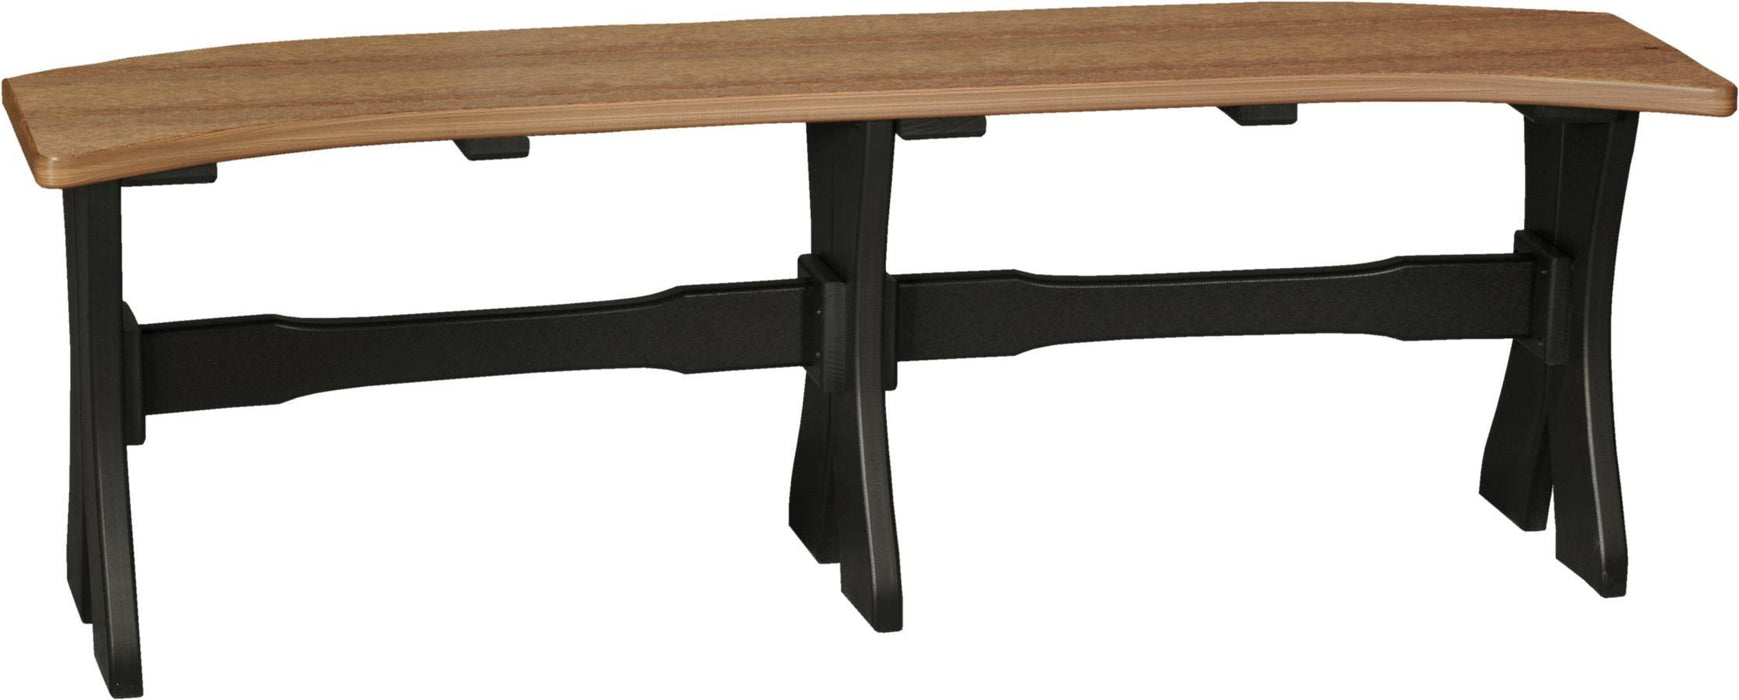 LuxCraft LuxCraft Antique Mahogany Recycled Plastic Table Bench Antique Mahogany on Black / 52" Bench P52TBAMB